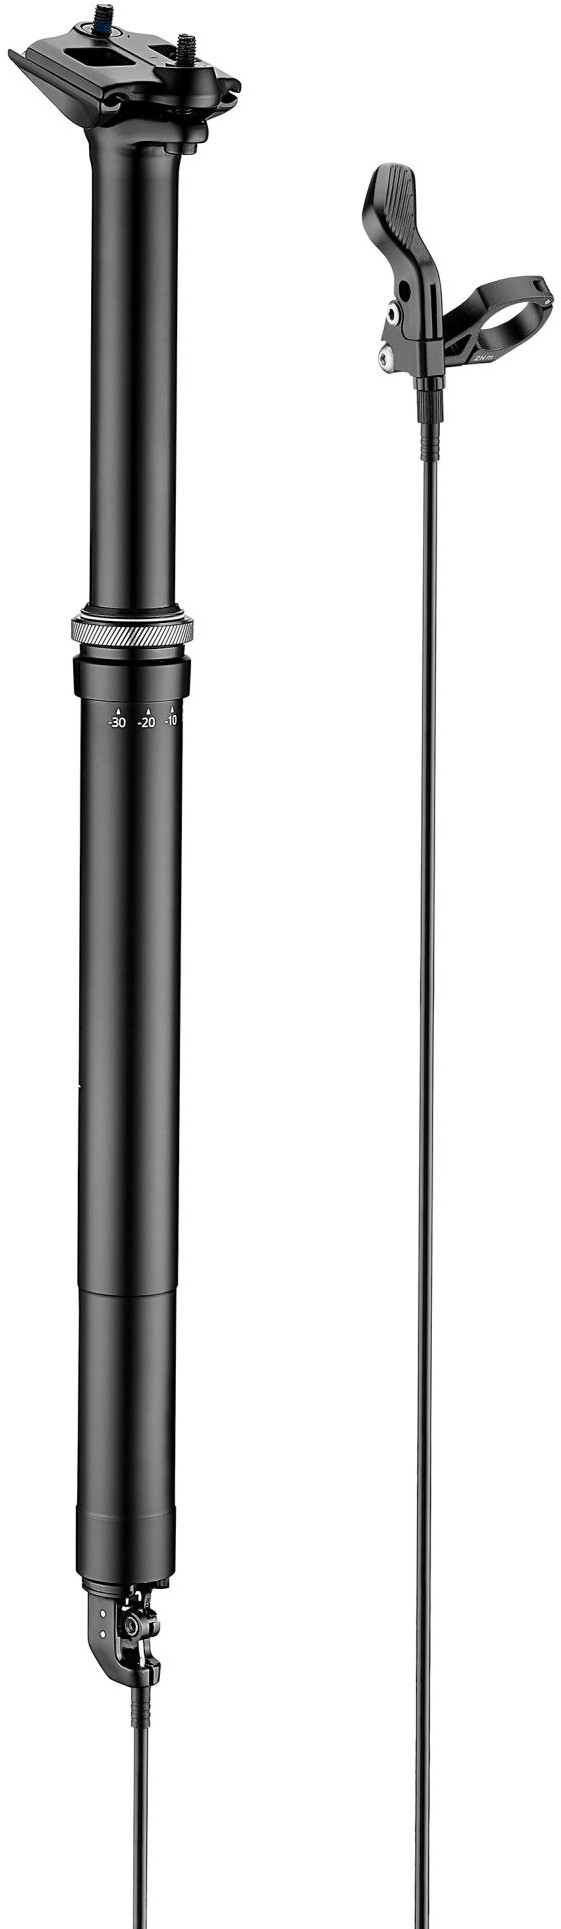 Contact SL Switch 150 Travel Seatpost image 0